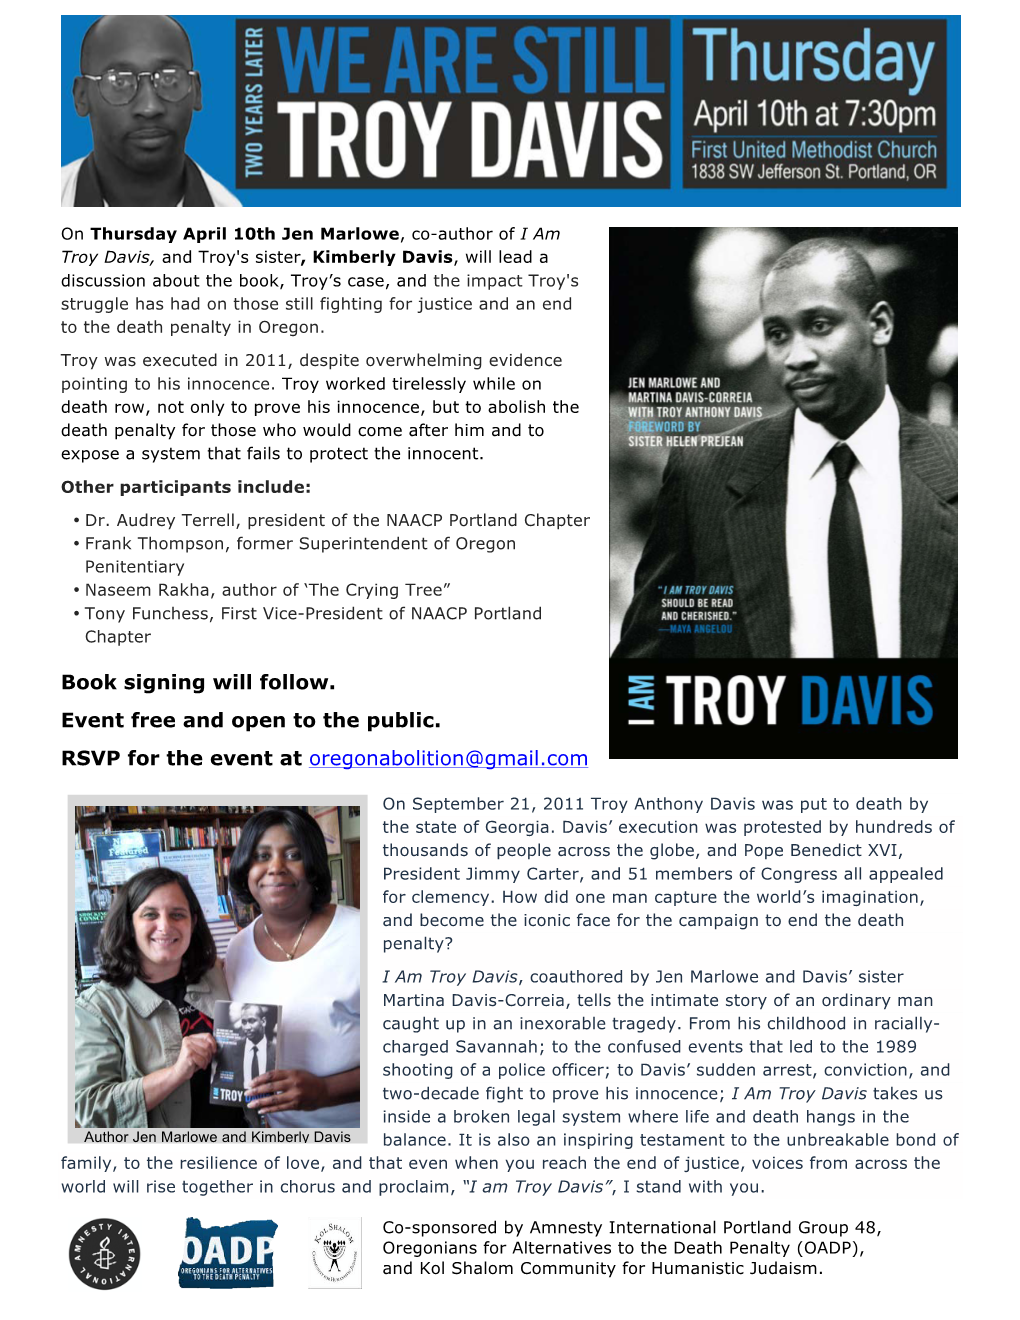 We Are Still Troy Davis April 10Th at 7:30 Pm First United Methodist Church, Fireside Room 1838 SW Jefferson St, Portland